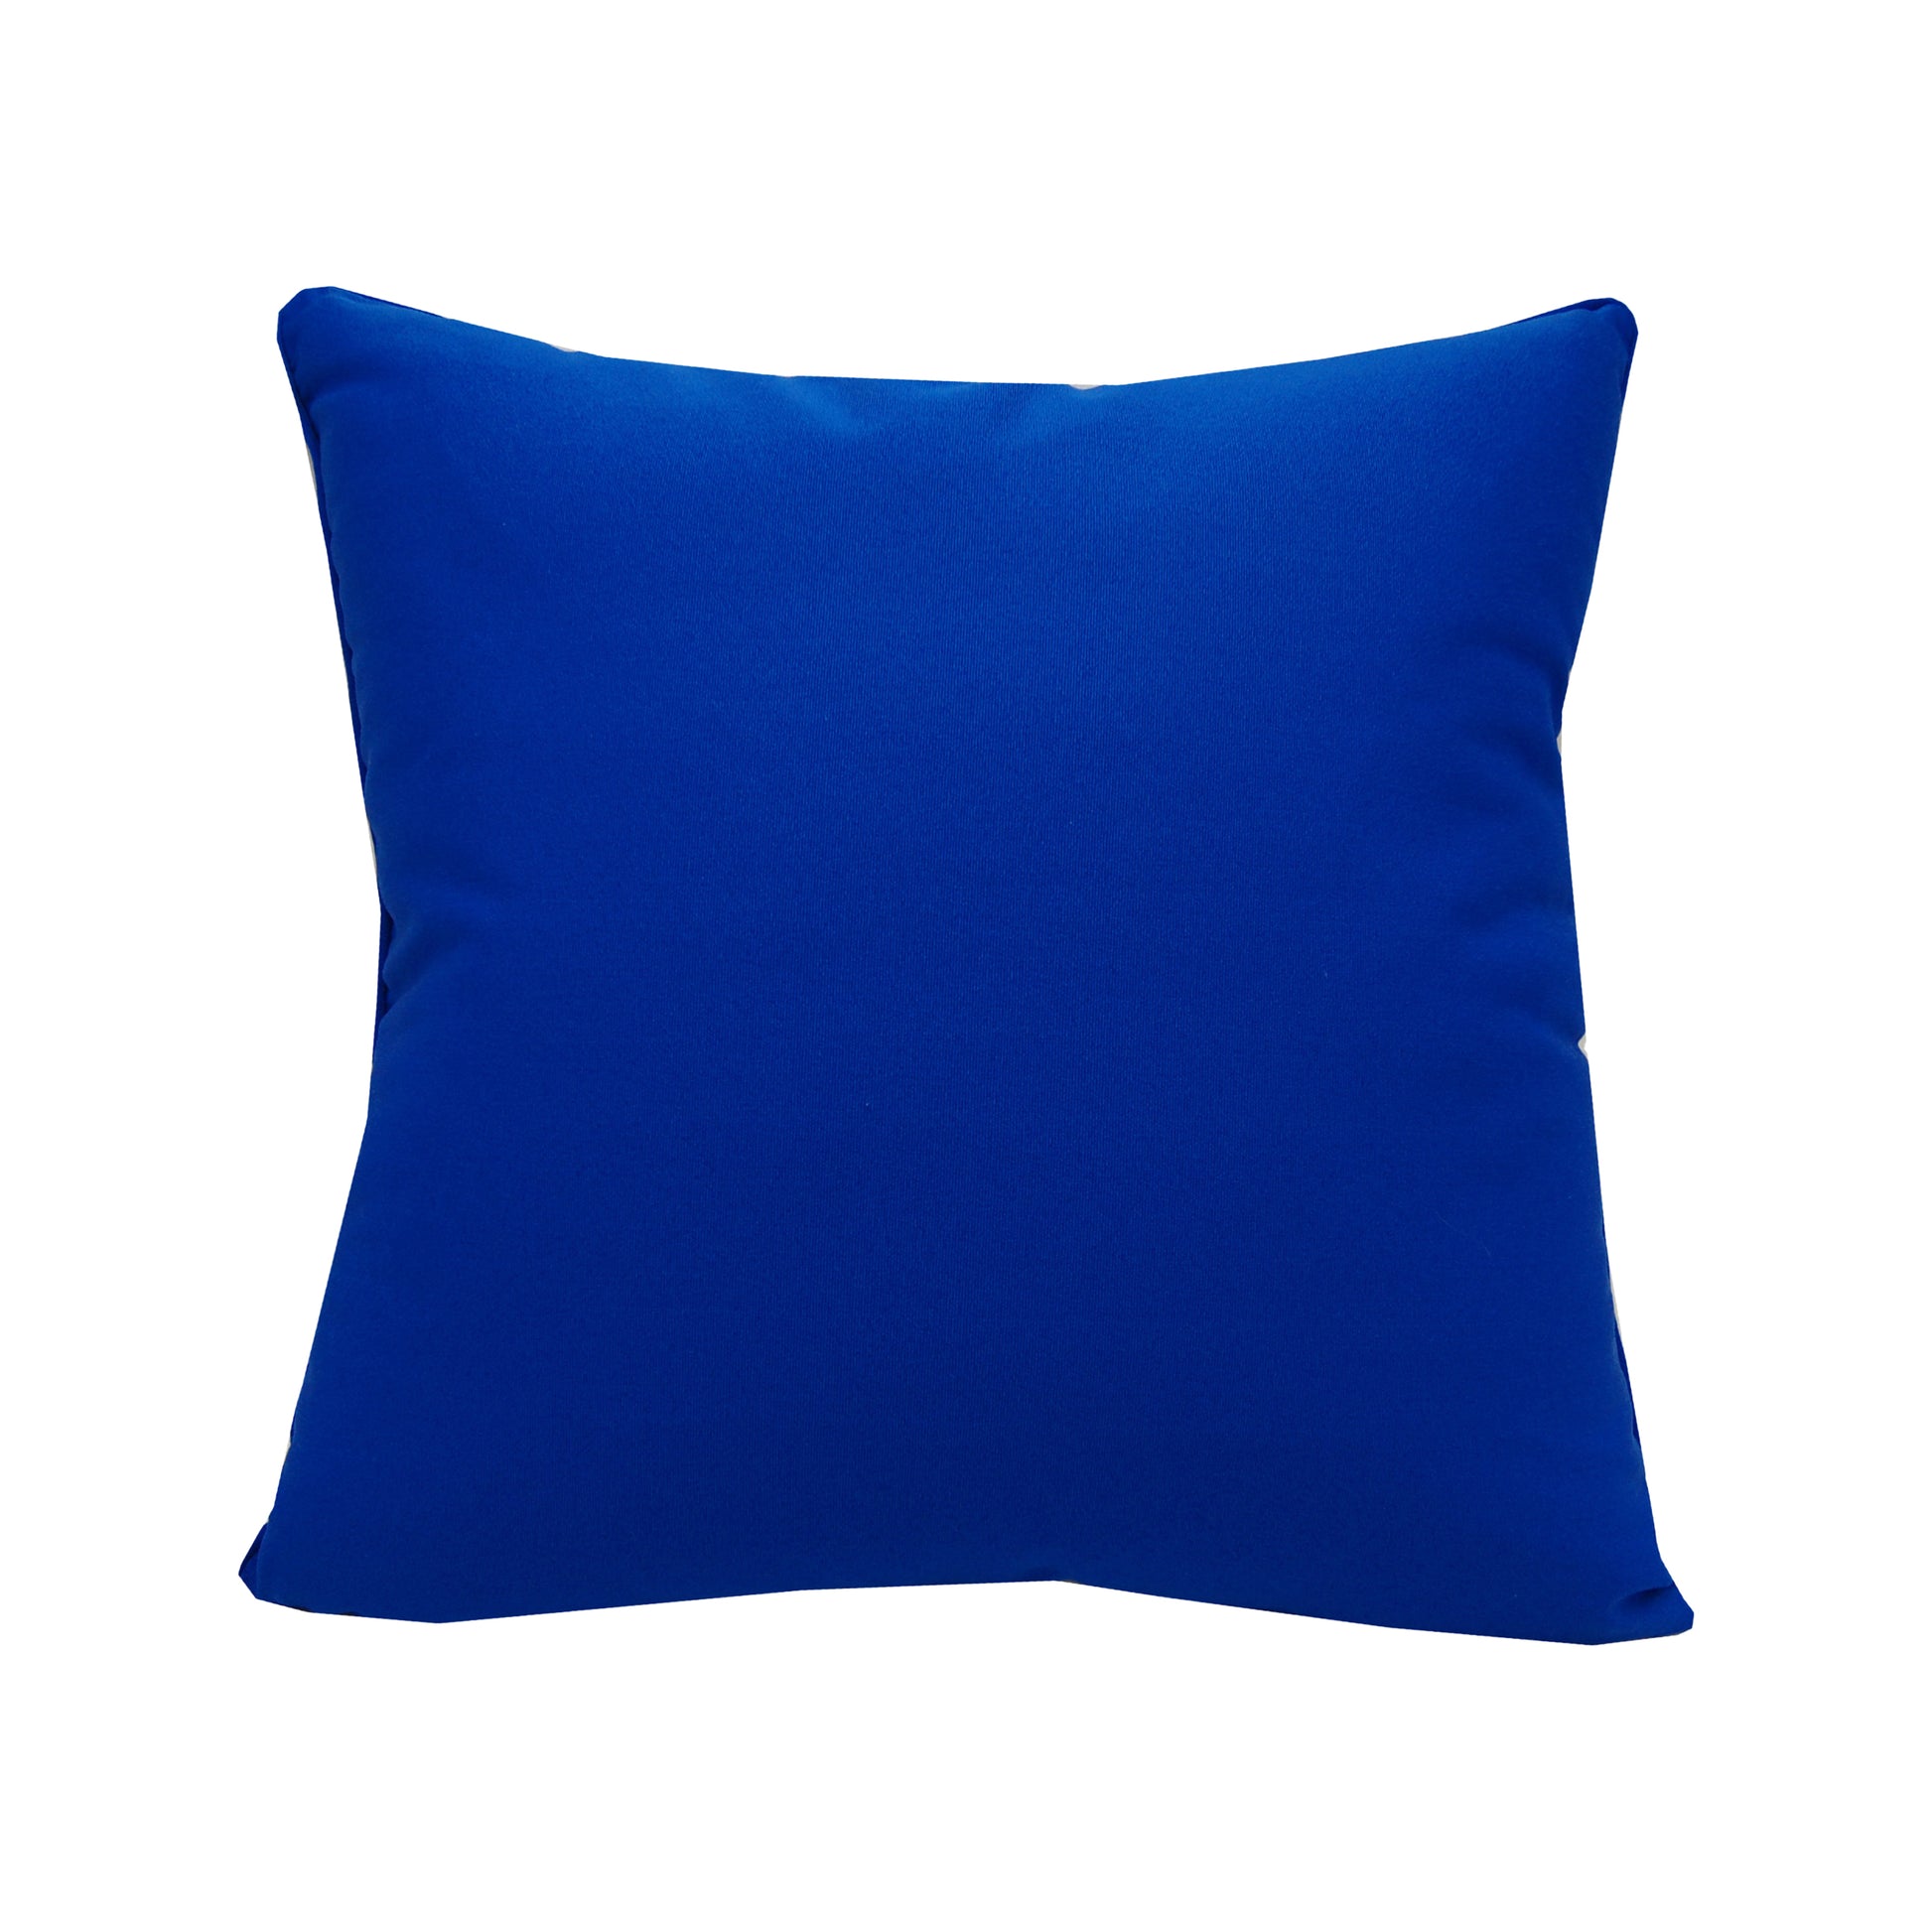 Solid blue fabric; back side of the Beach House Ikat outdoor pillow.